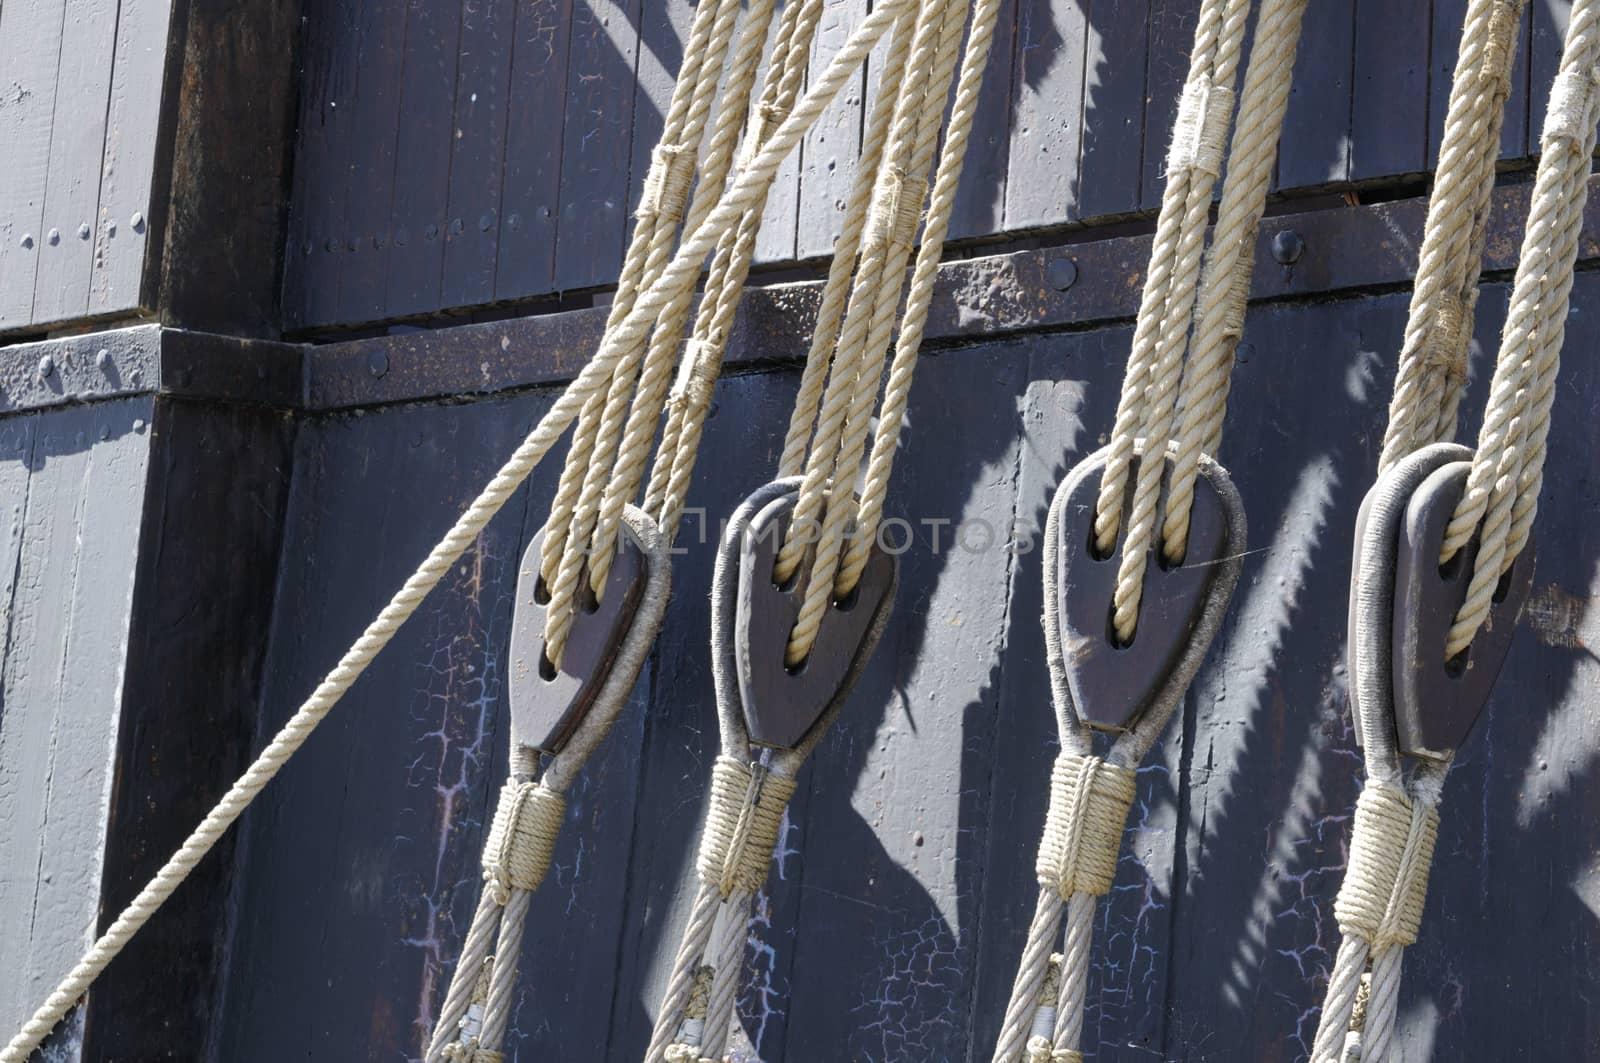 Ropes and pulleys on a ship.